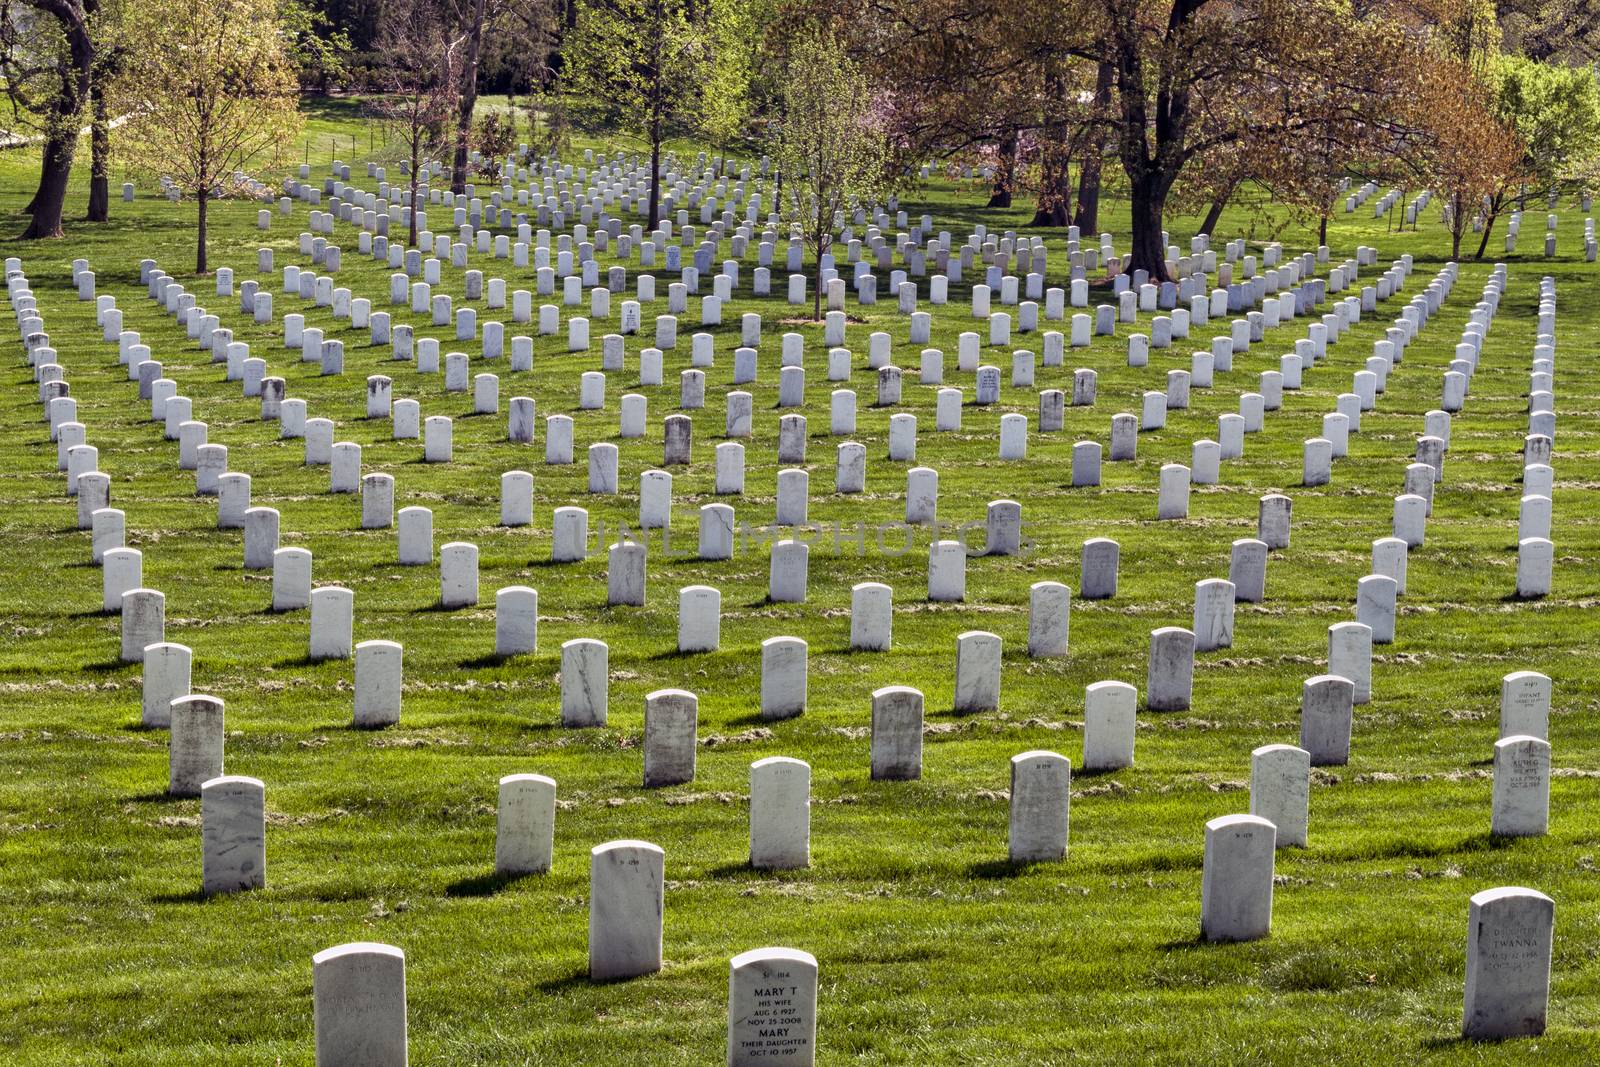 Headstones at the Arlington National Cemetery in Virginia, USA